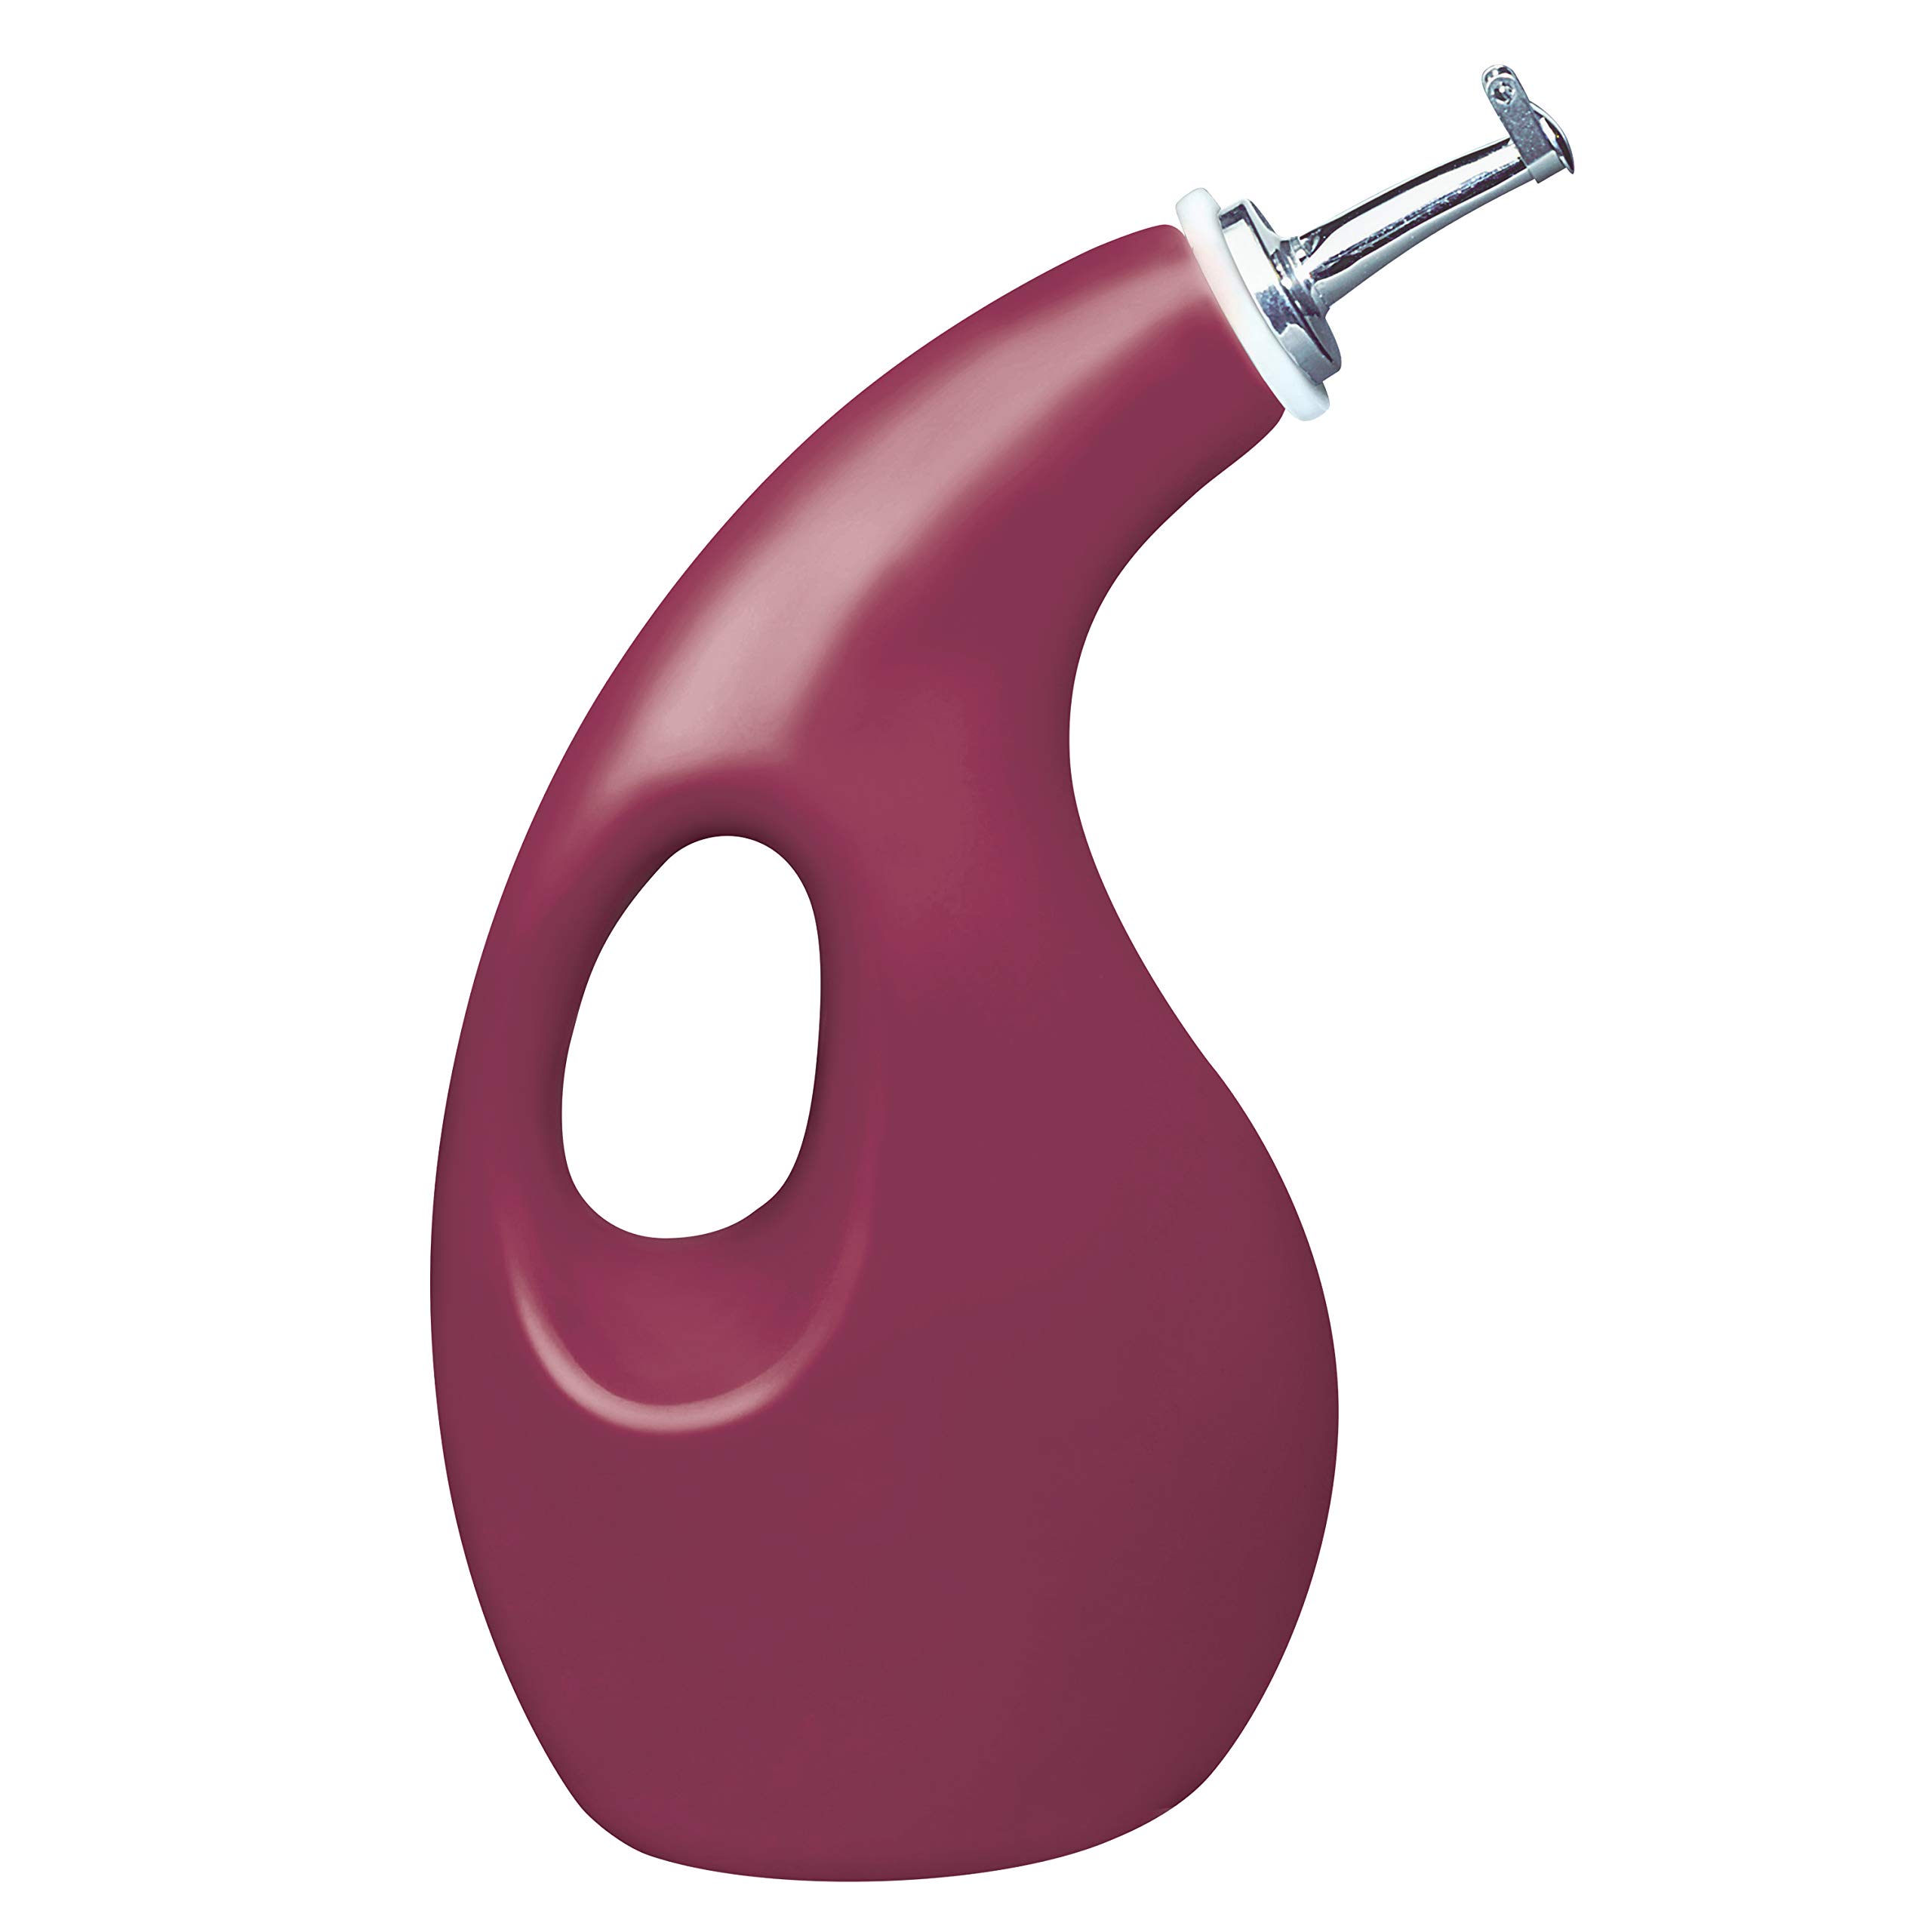 24-Oz Rachael Ray Solid Glaze Ceramics EVOO Olive Oil Bottle Dispenser w/ Spout (Burgundy) $8 + Free Shipping w/ Prime or on $35+